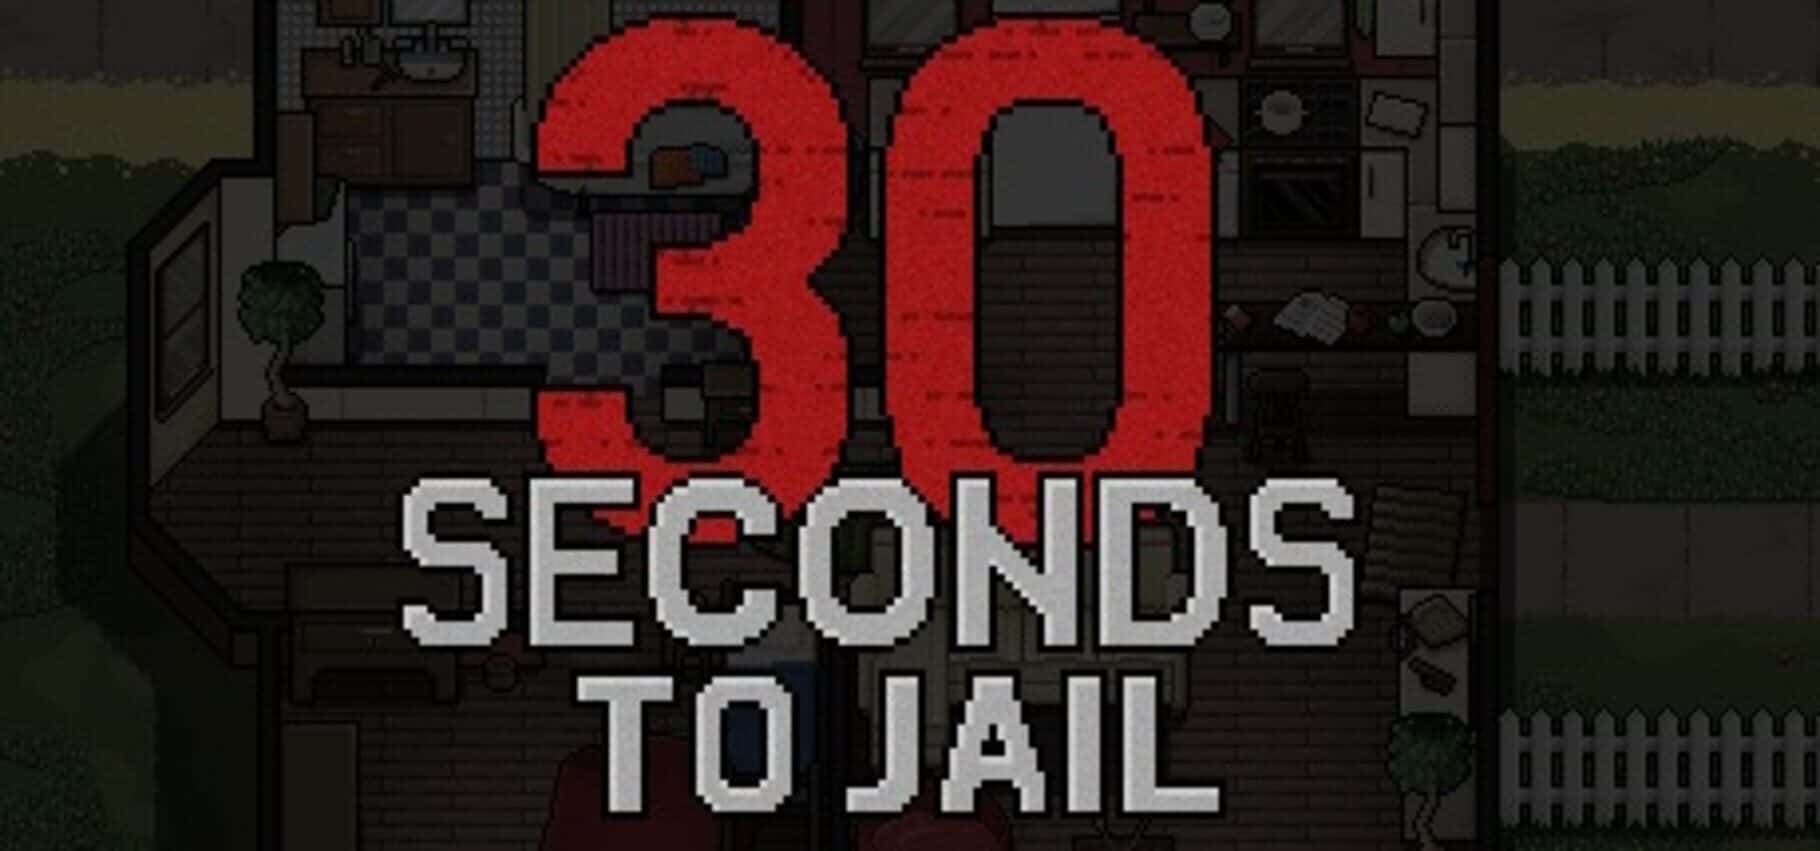 30 seconds to jail